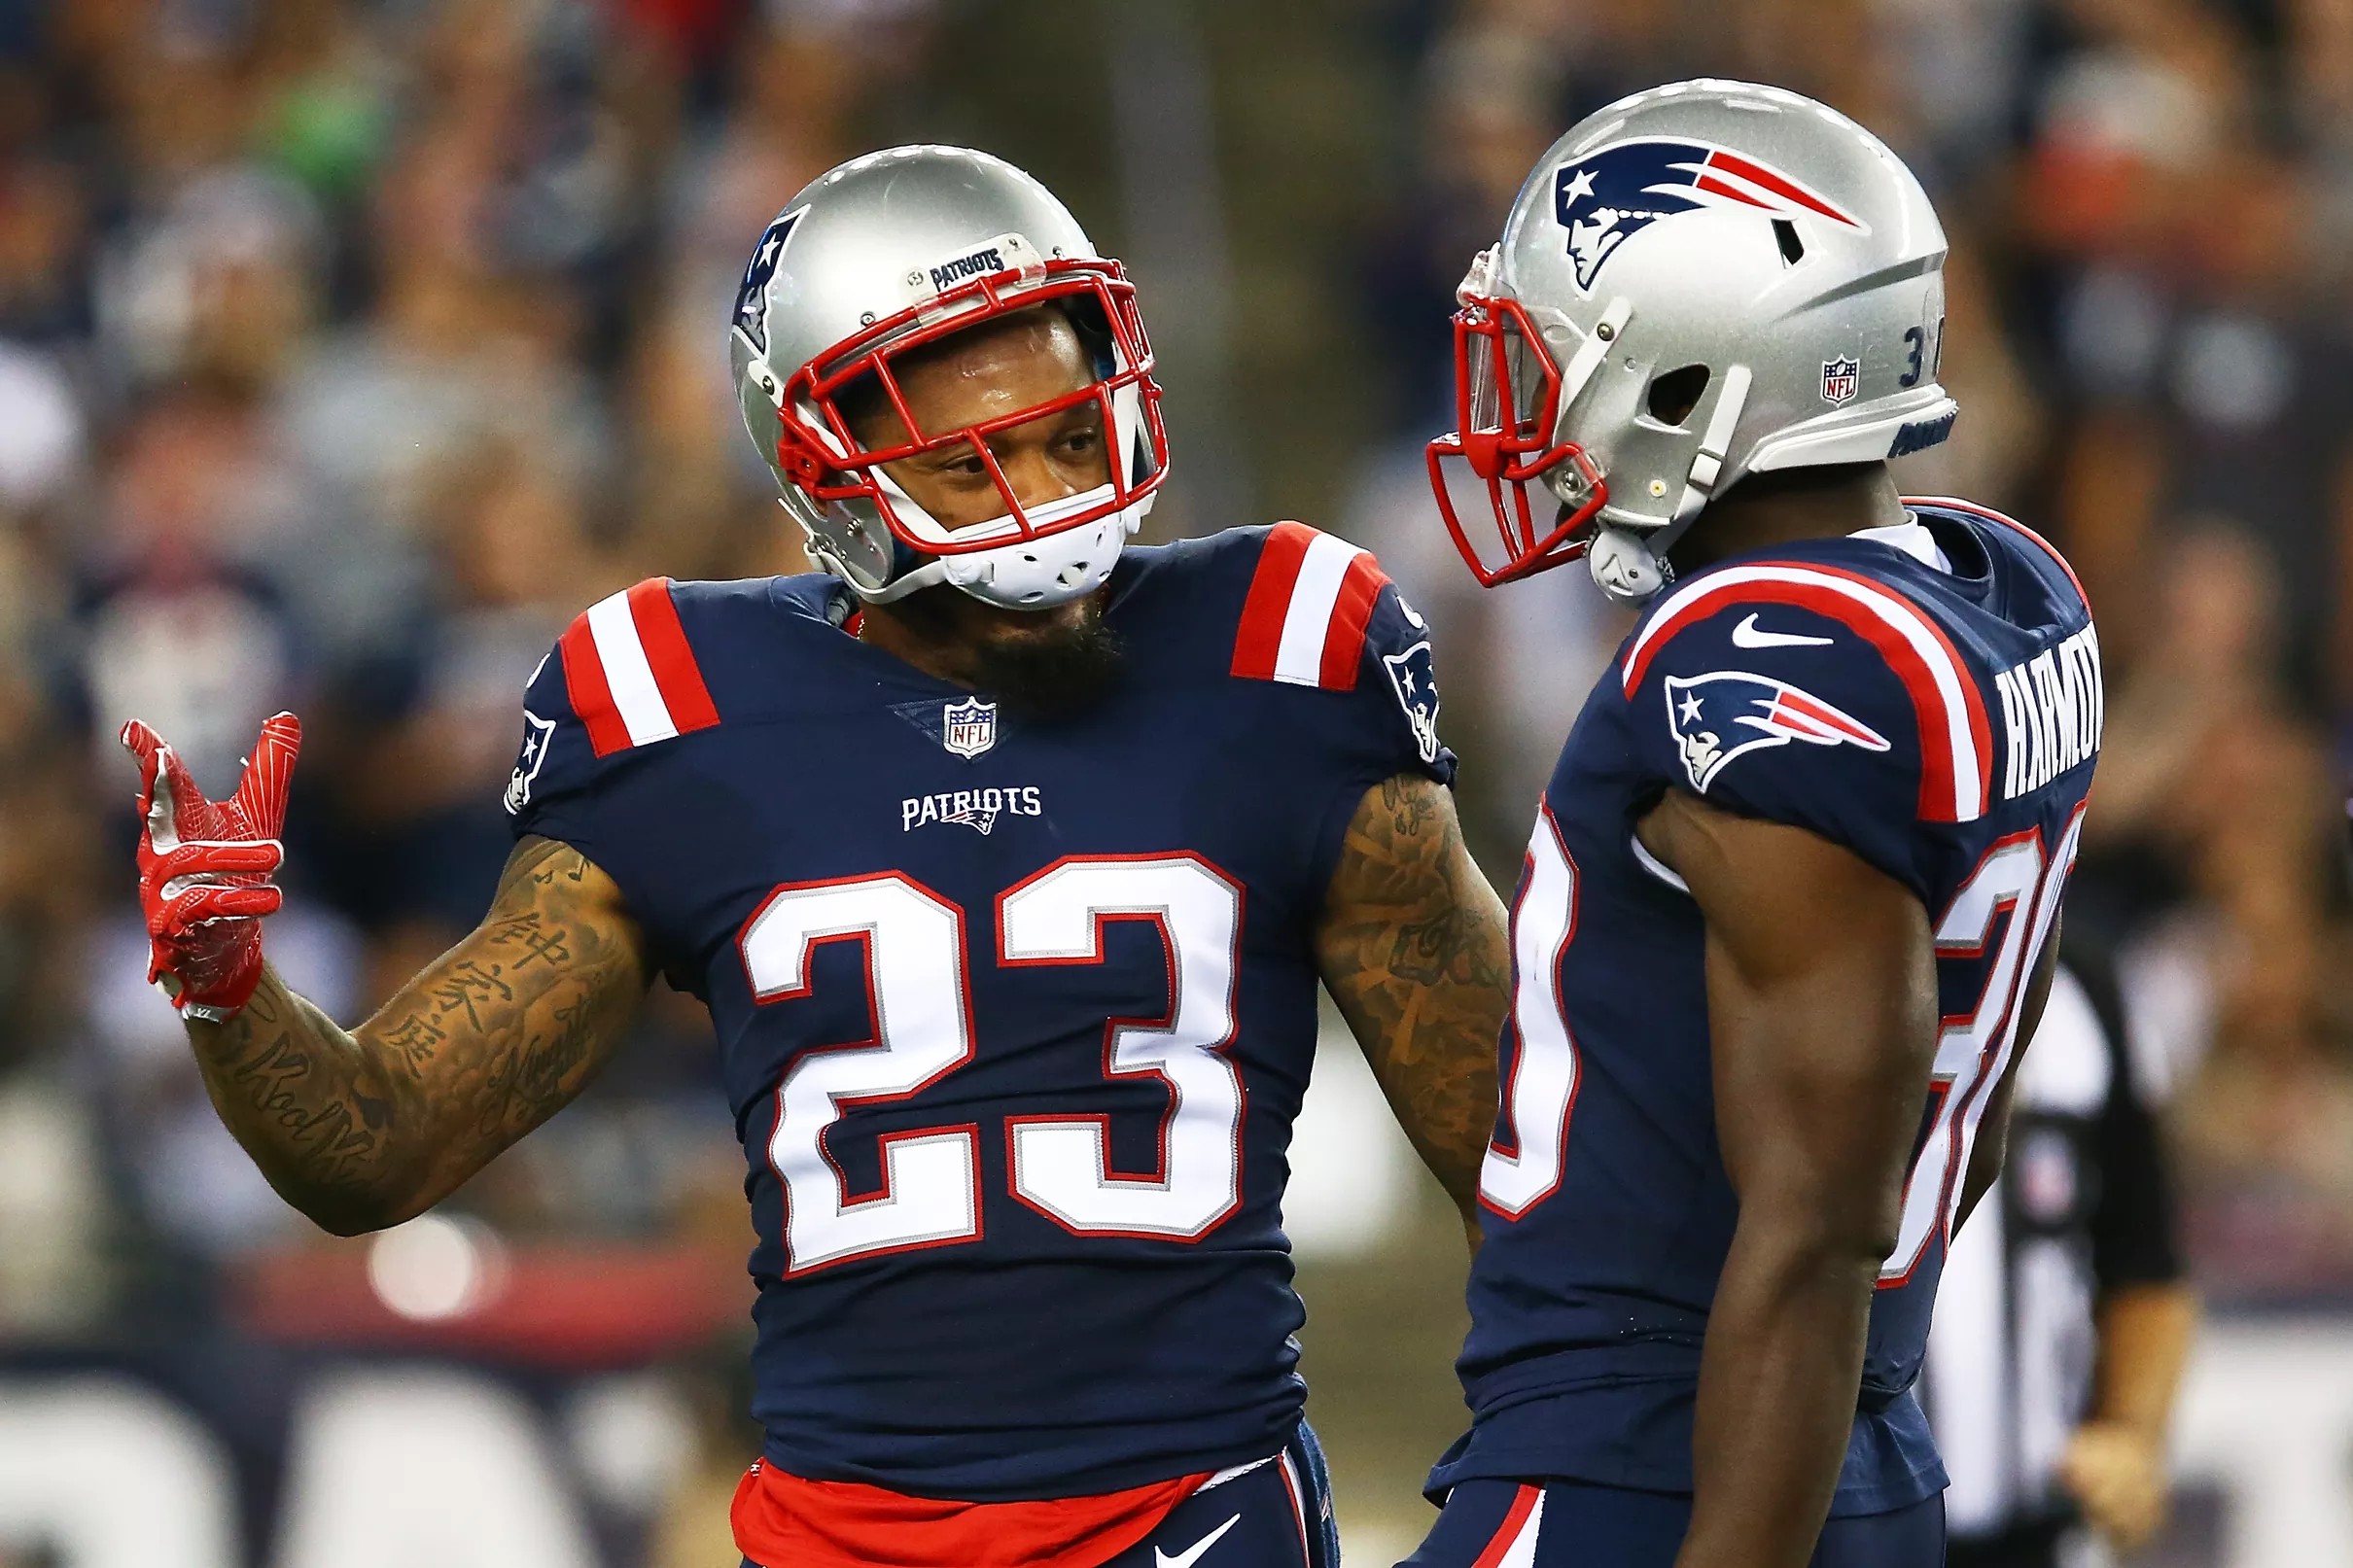 Teammates show their support for Patriots safety Patrick Chung in light